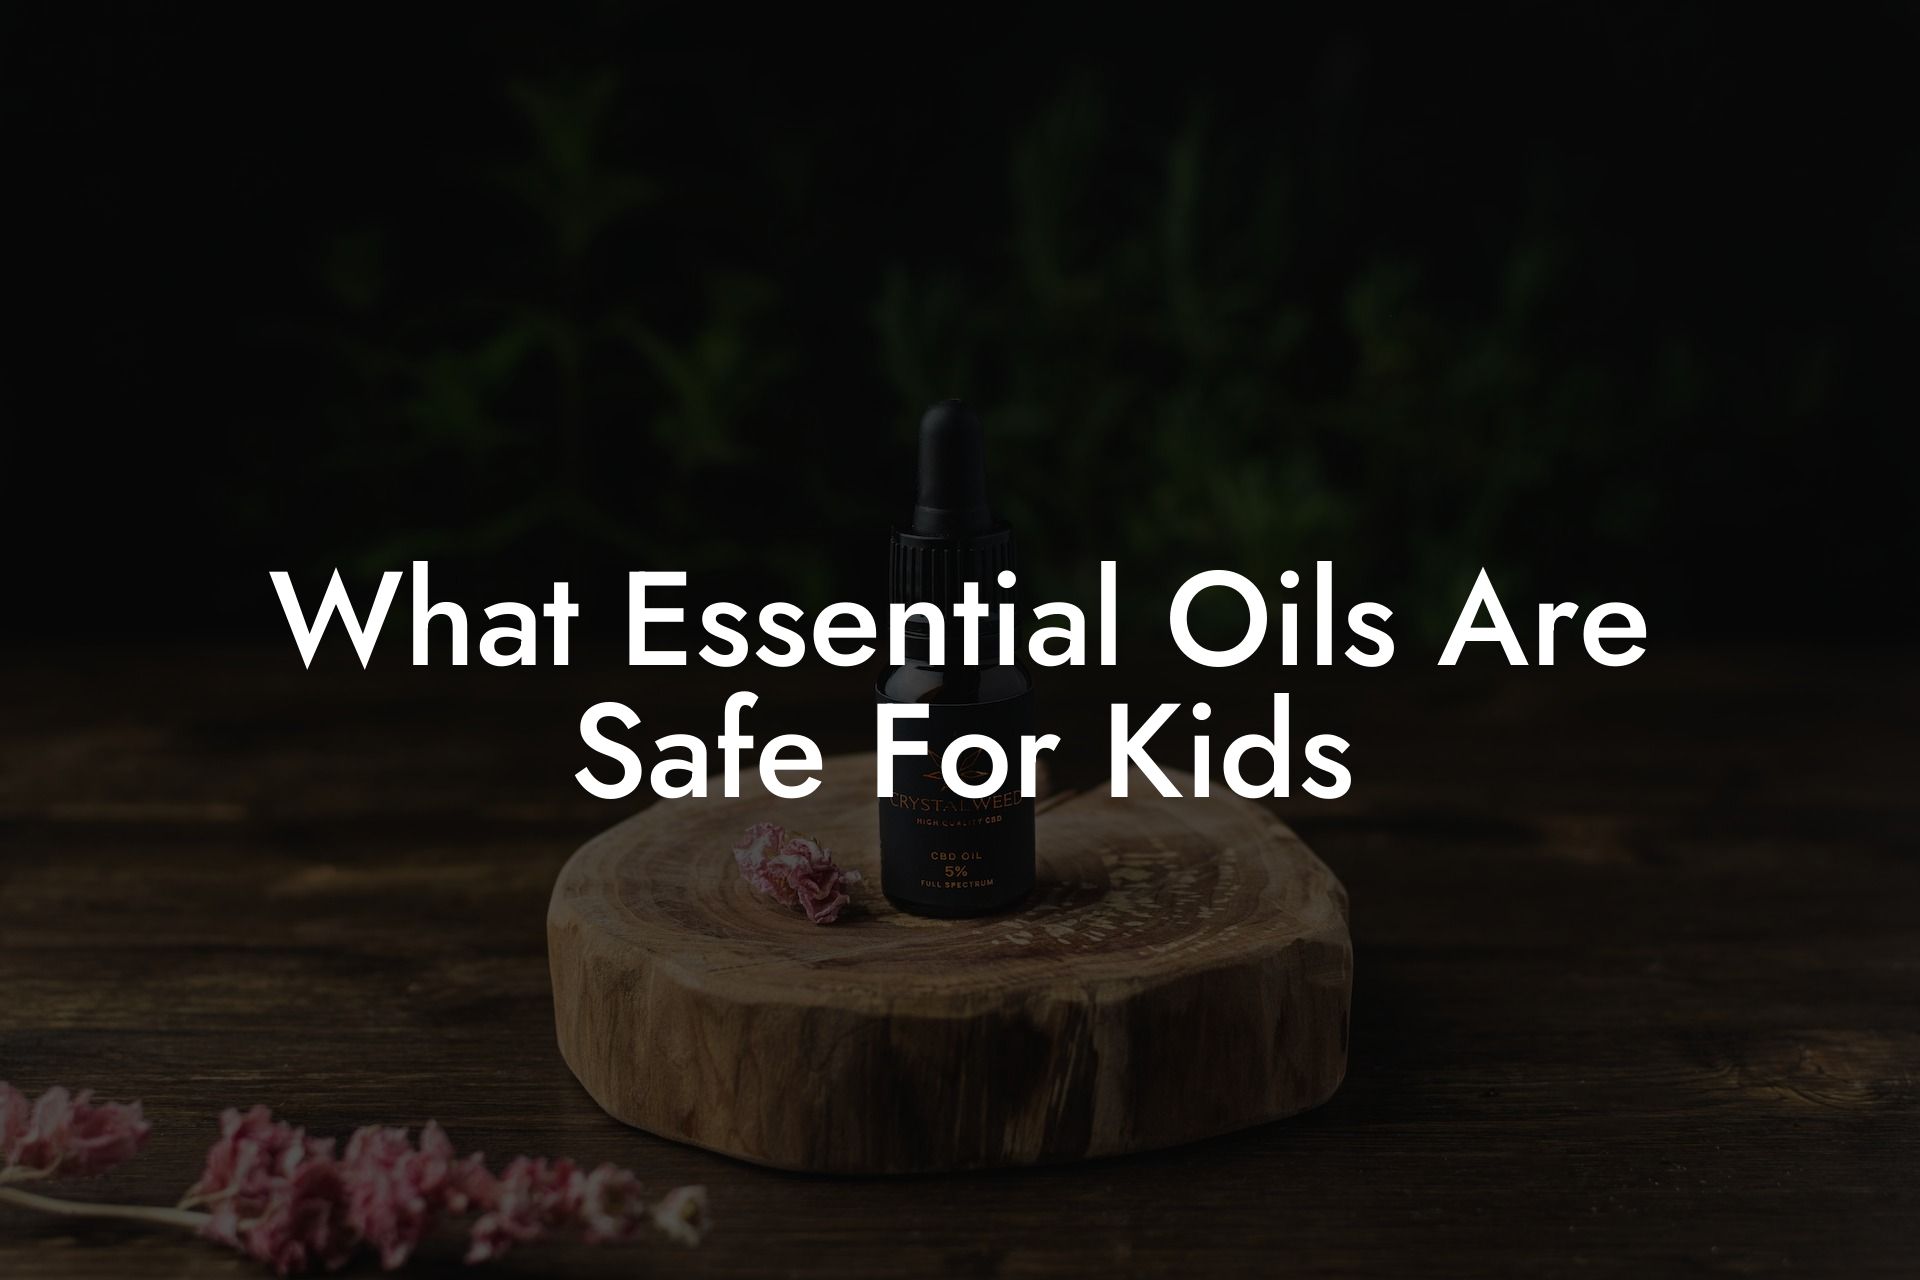 What Essential Oils Are Safe For Kids